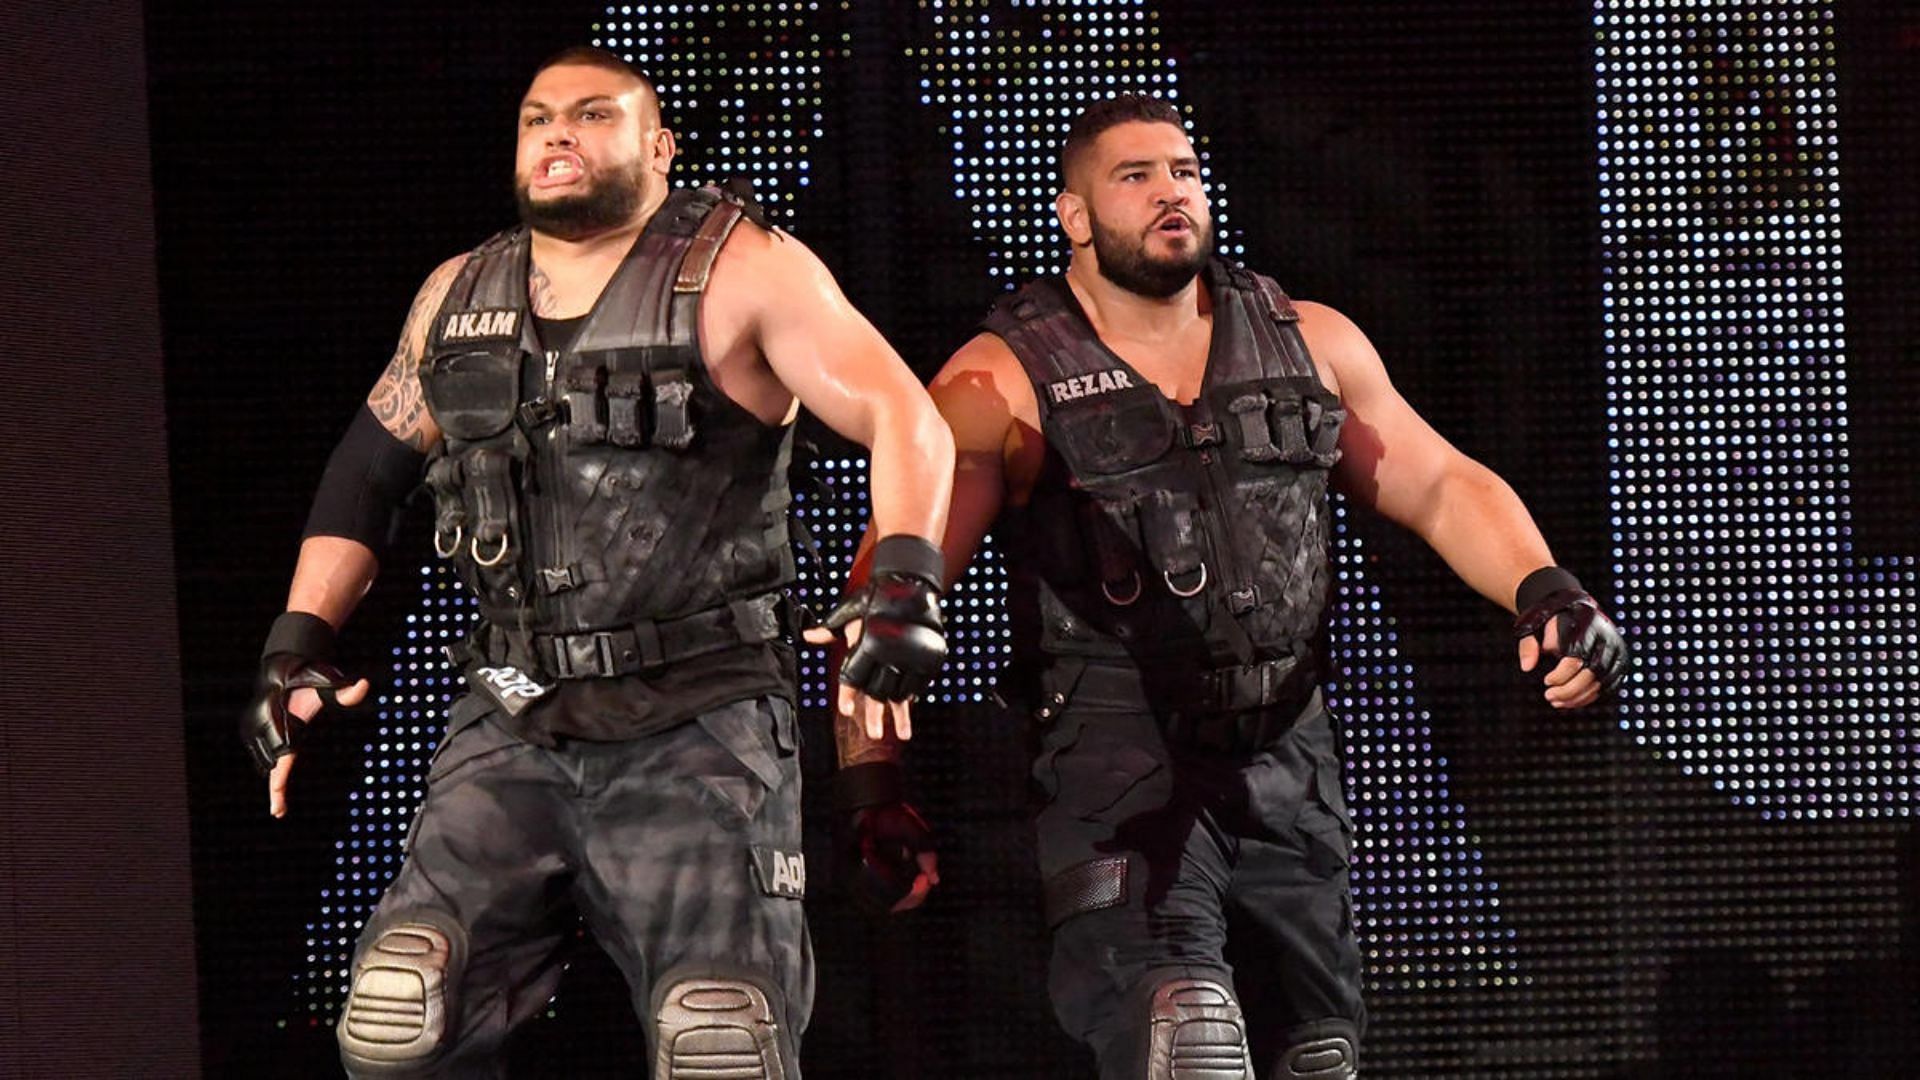 The Authors of Pain during their entrance